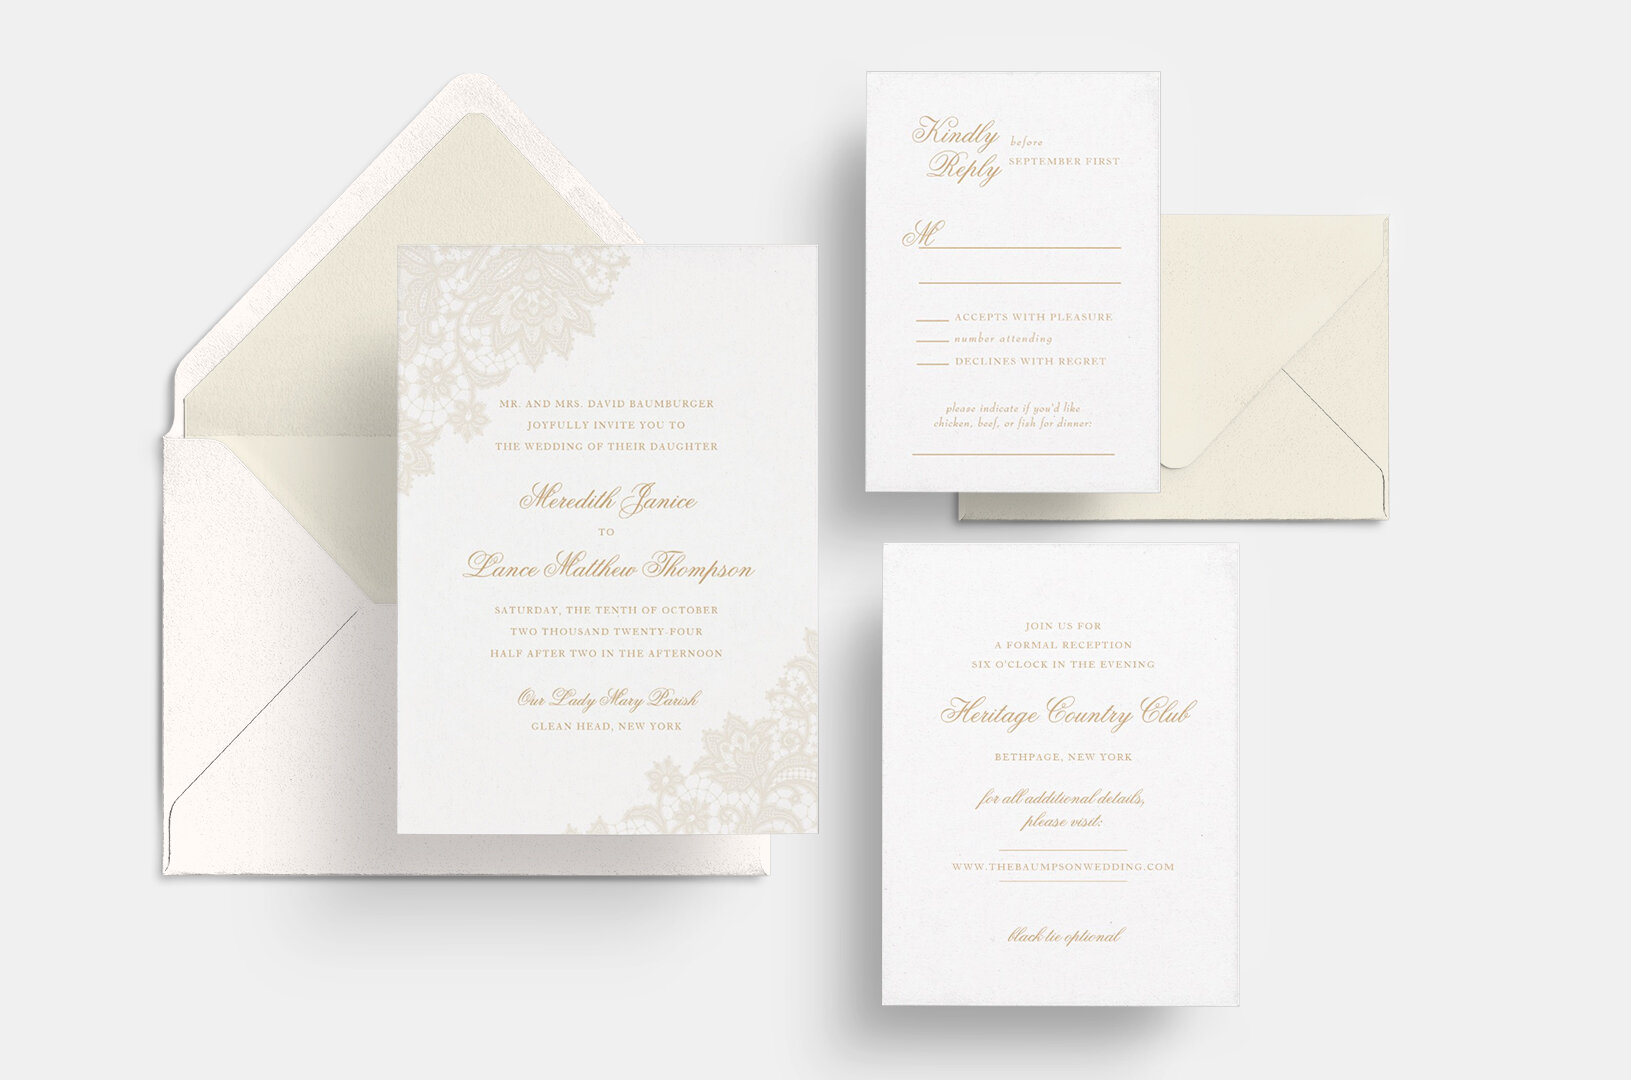 Delicate Lace Suite Sincerely Jackie Long Island Wedding Invitations 2.jpg